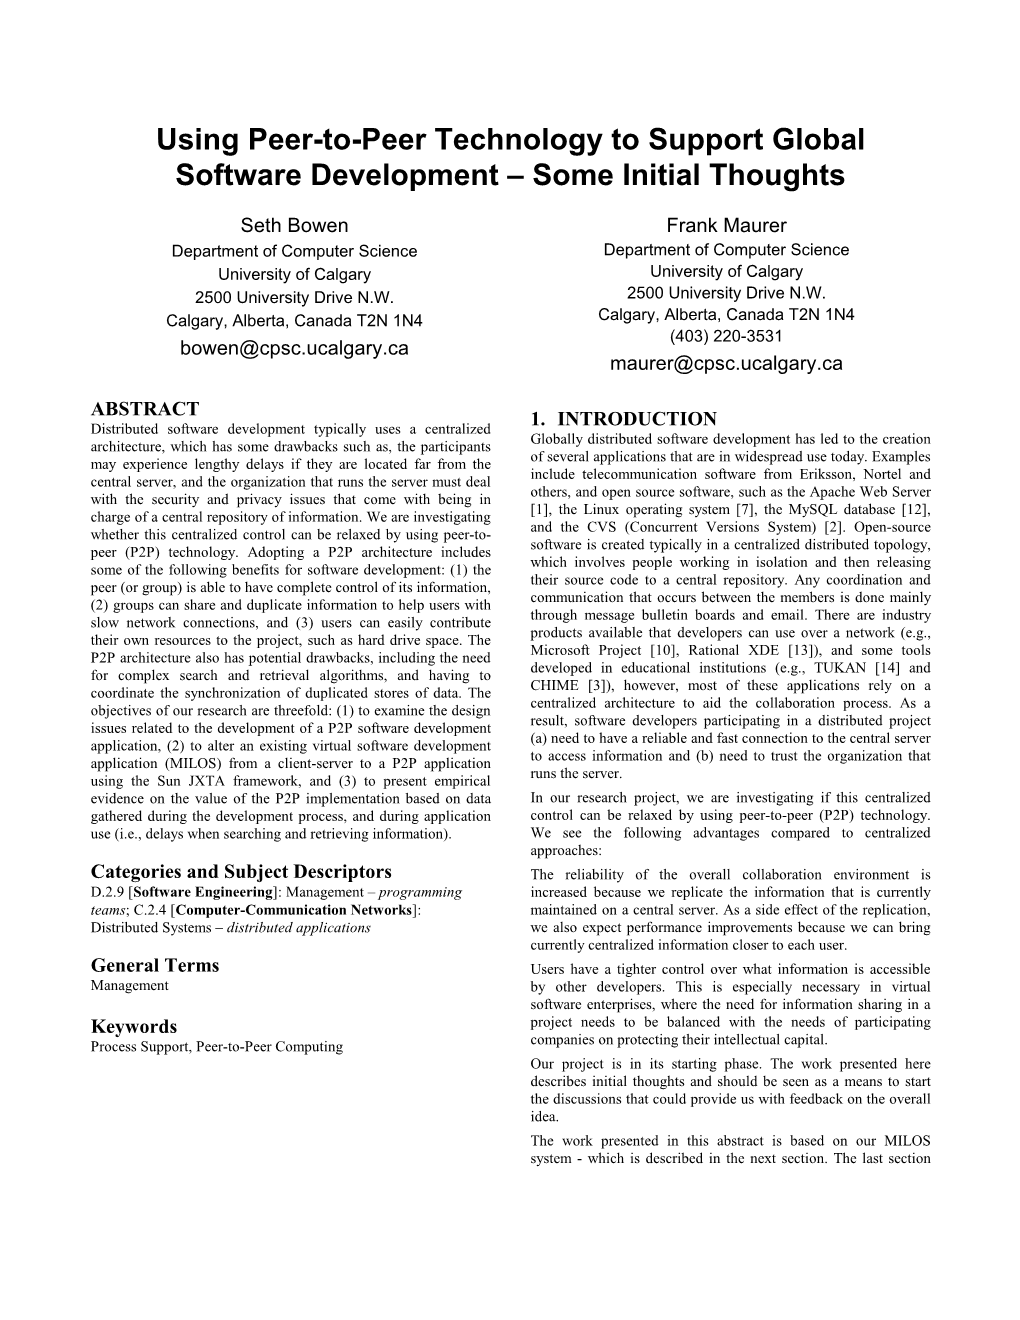 Using Peer-To-Peer Technology to Support Global Software Development – Some Initial Thoughts